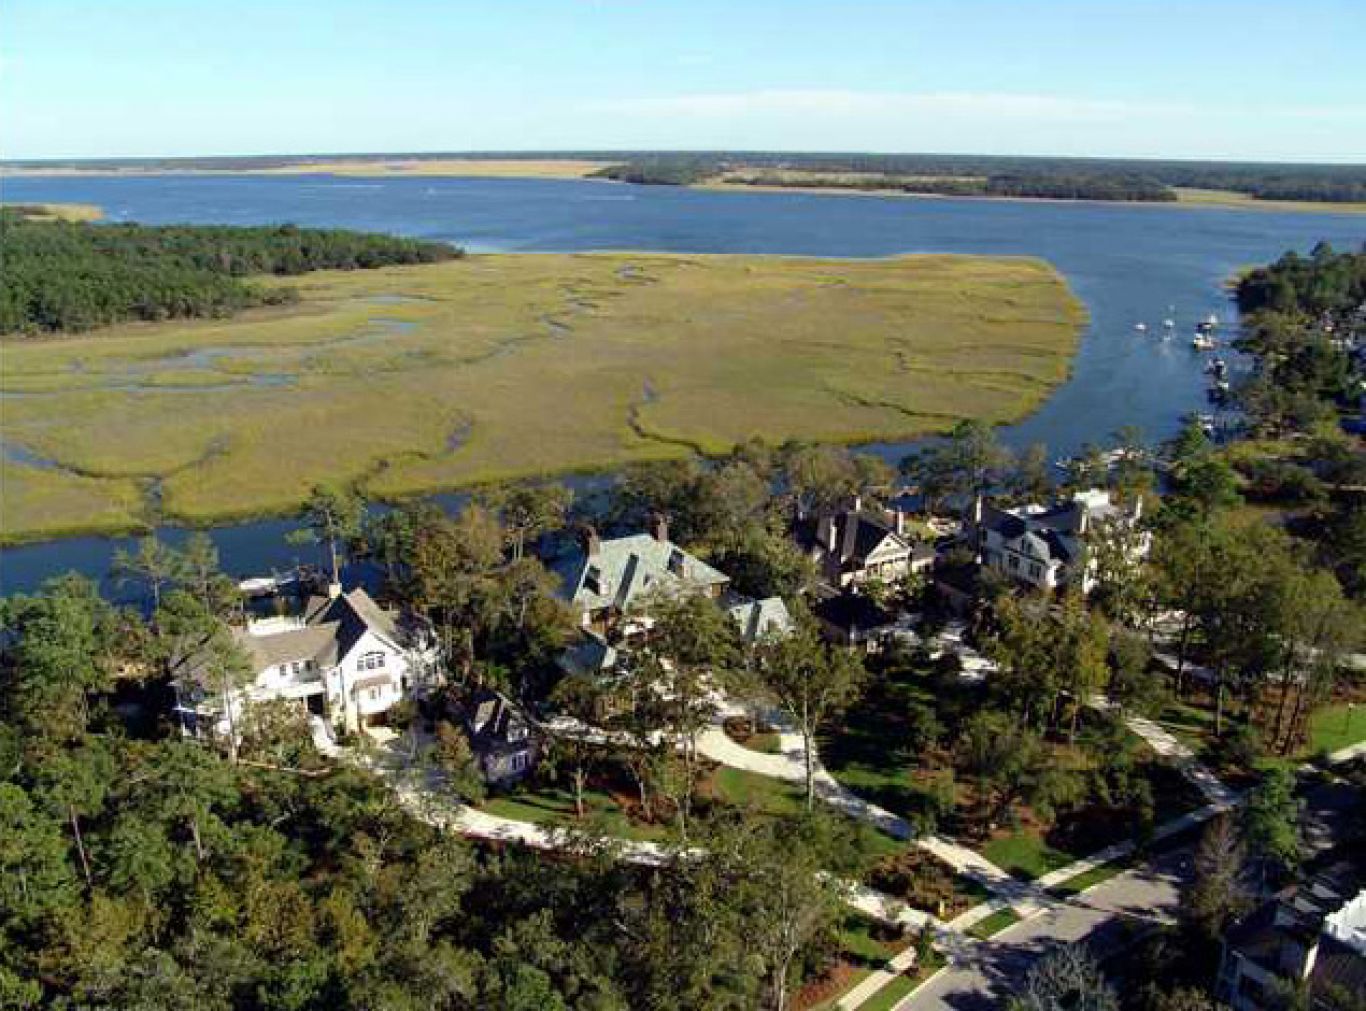 Exspanvie Water Views And Short Boat Ride To The Wando River And Charleston Harbor. Excellent investments.